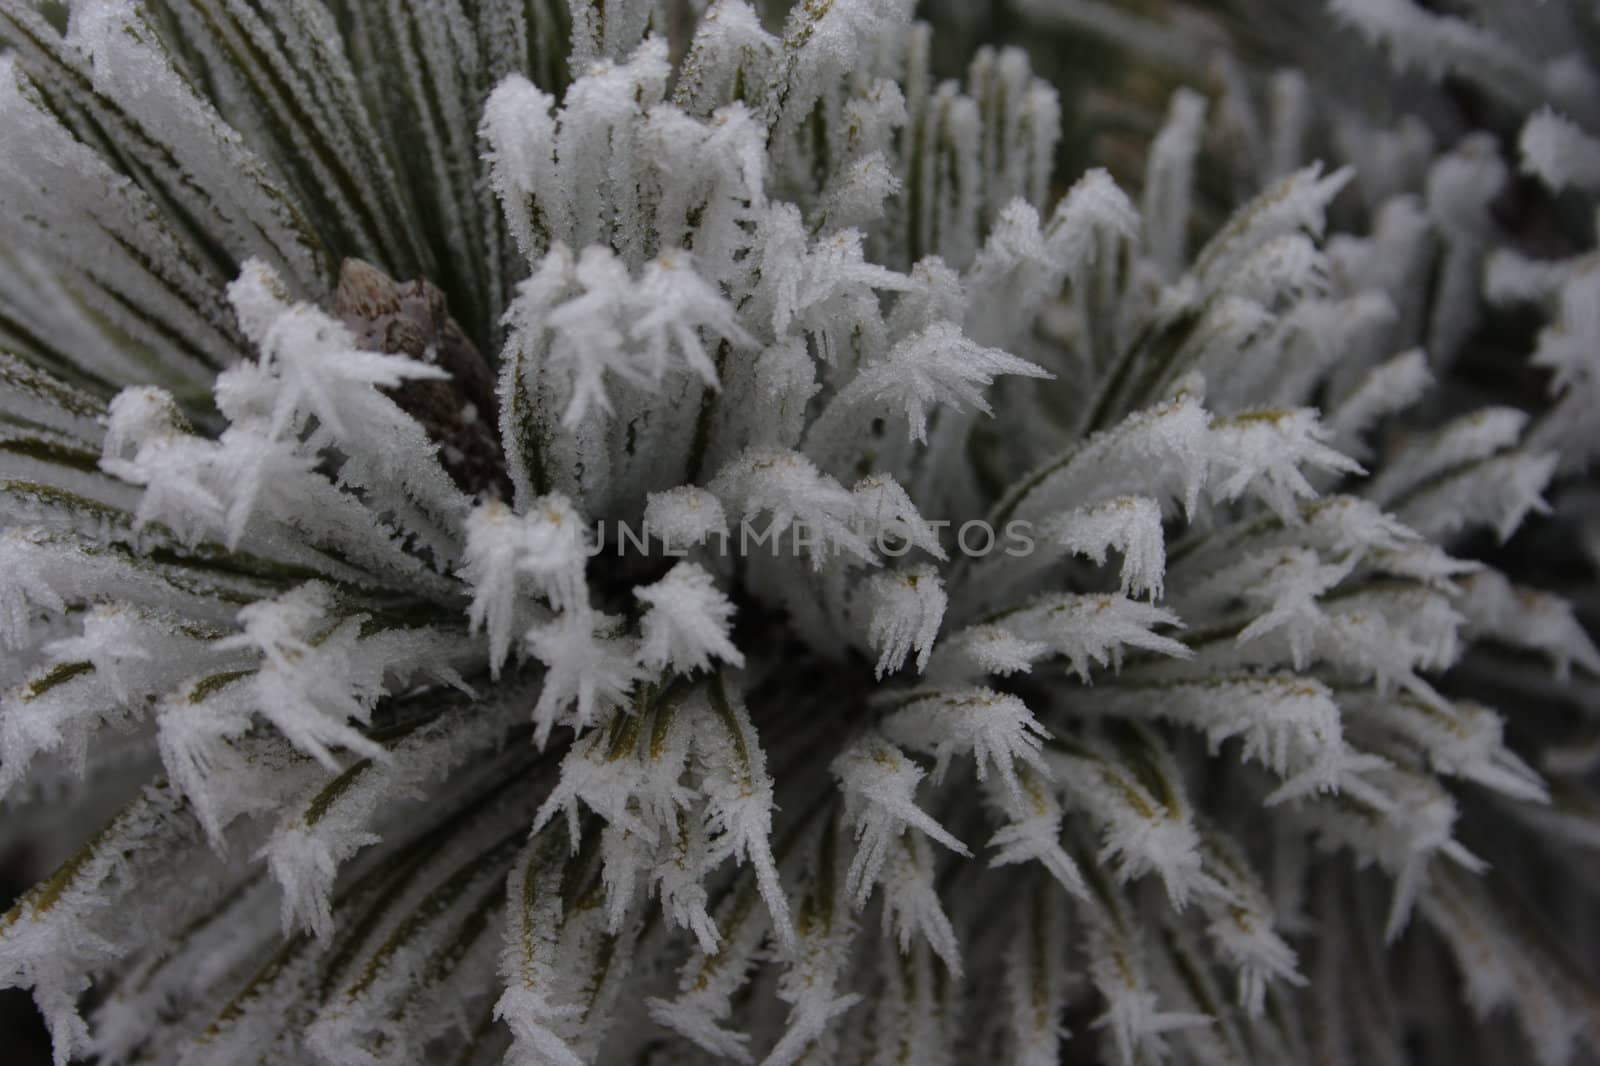 conifer needles dressed in needles of the hoar frost